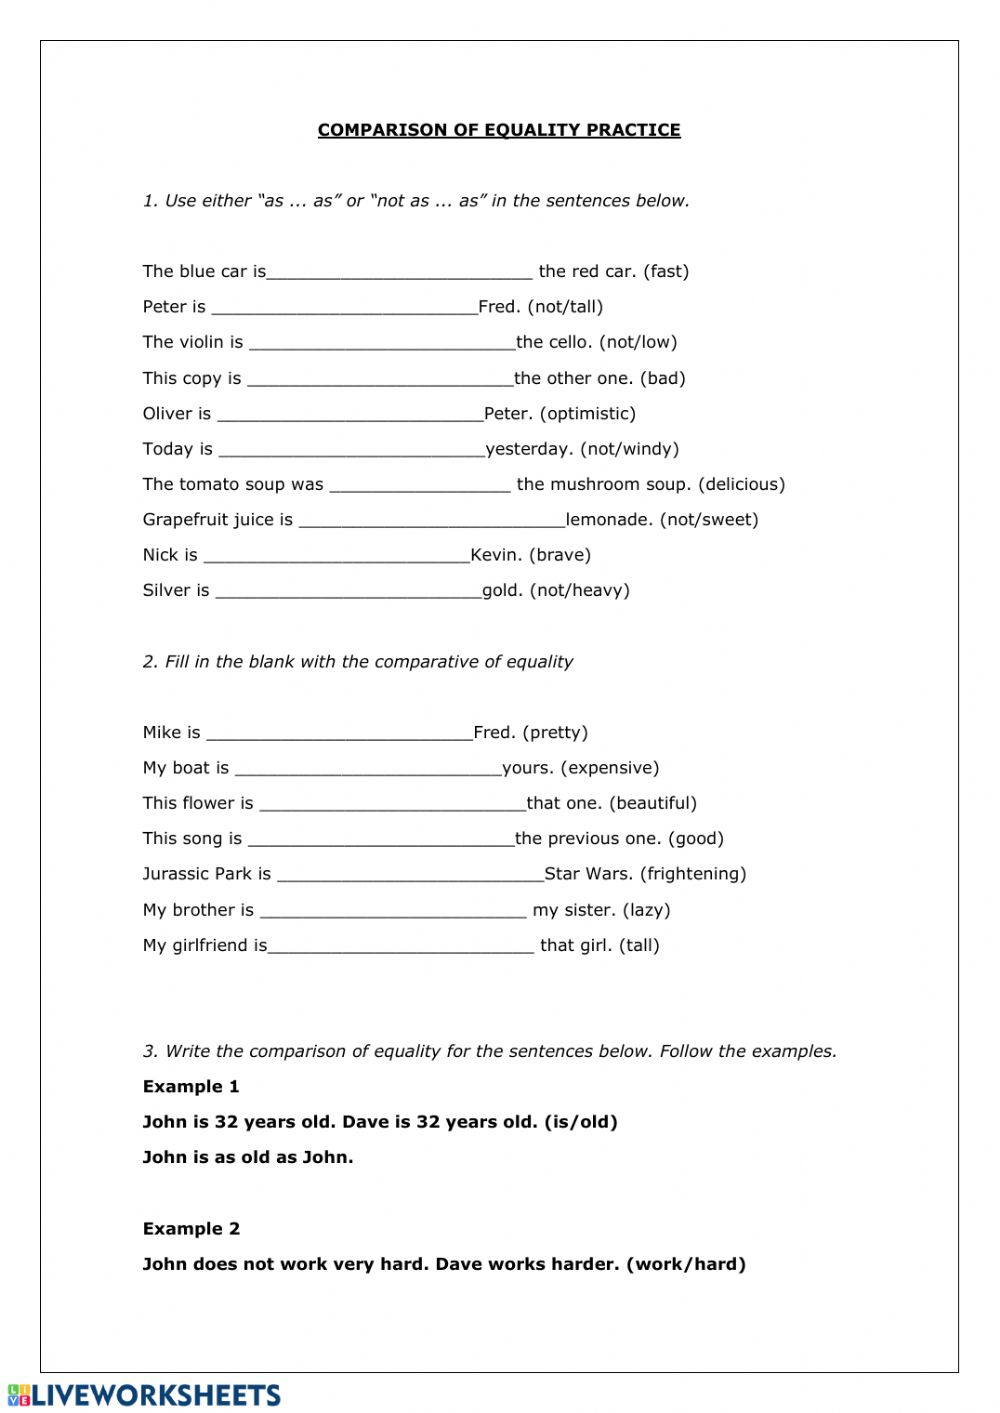 Comparative Of Equality Worksheet